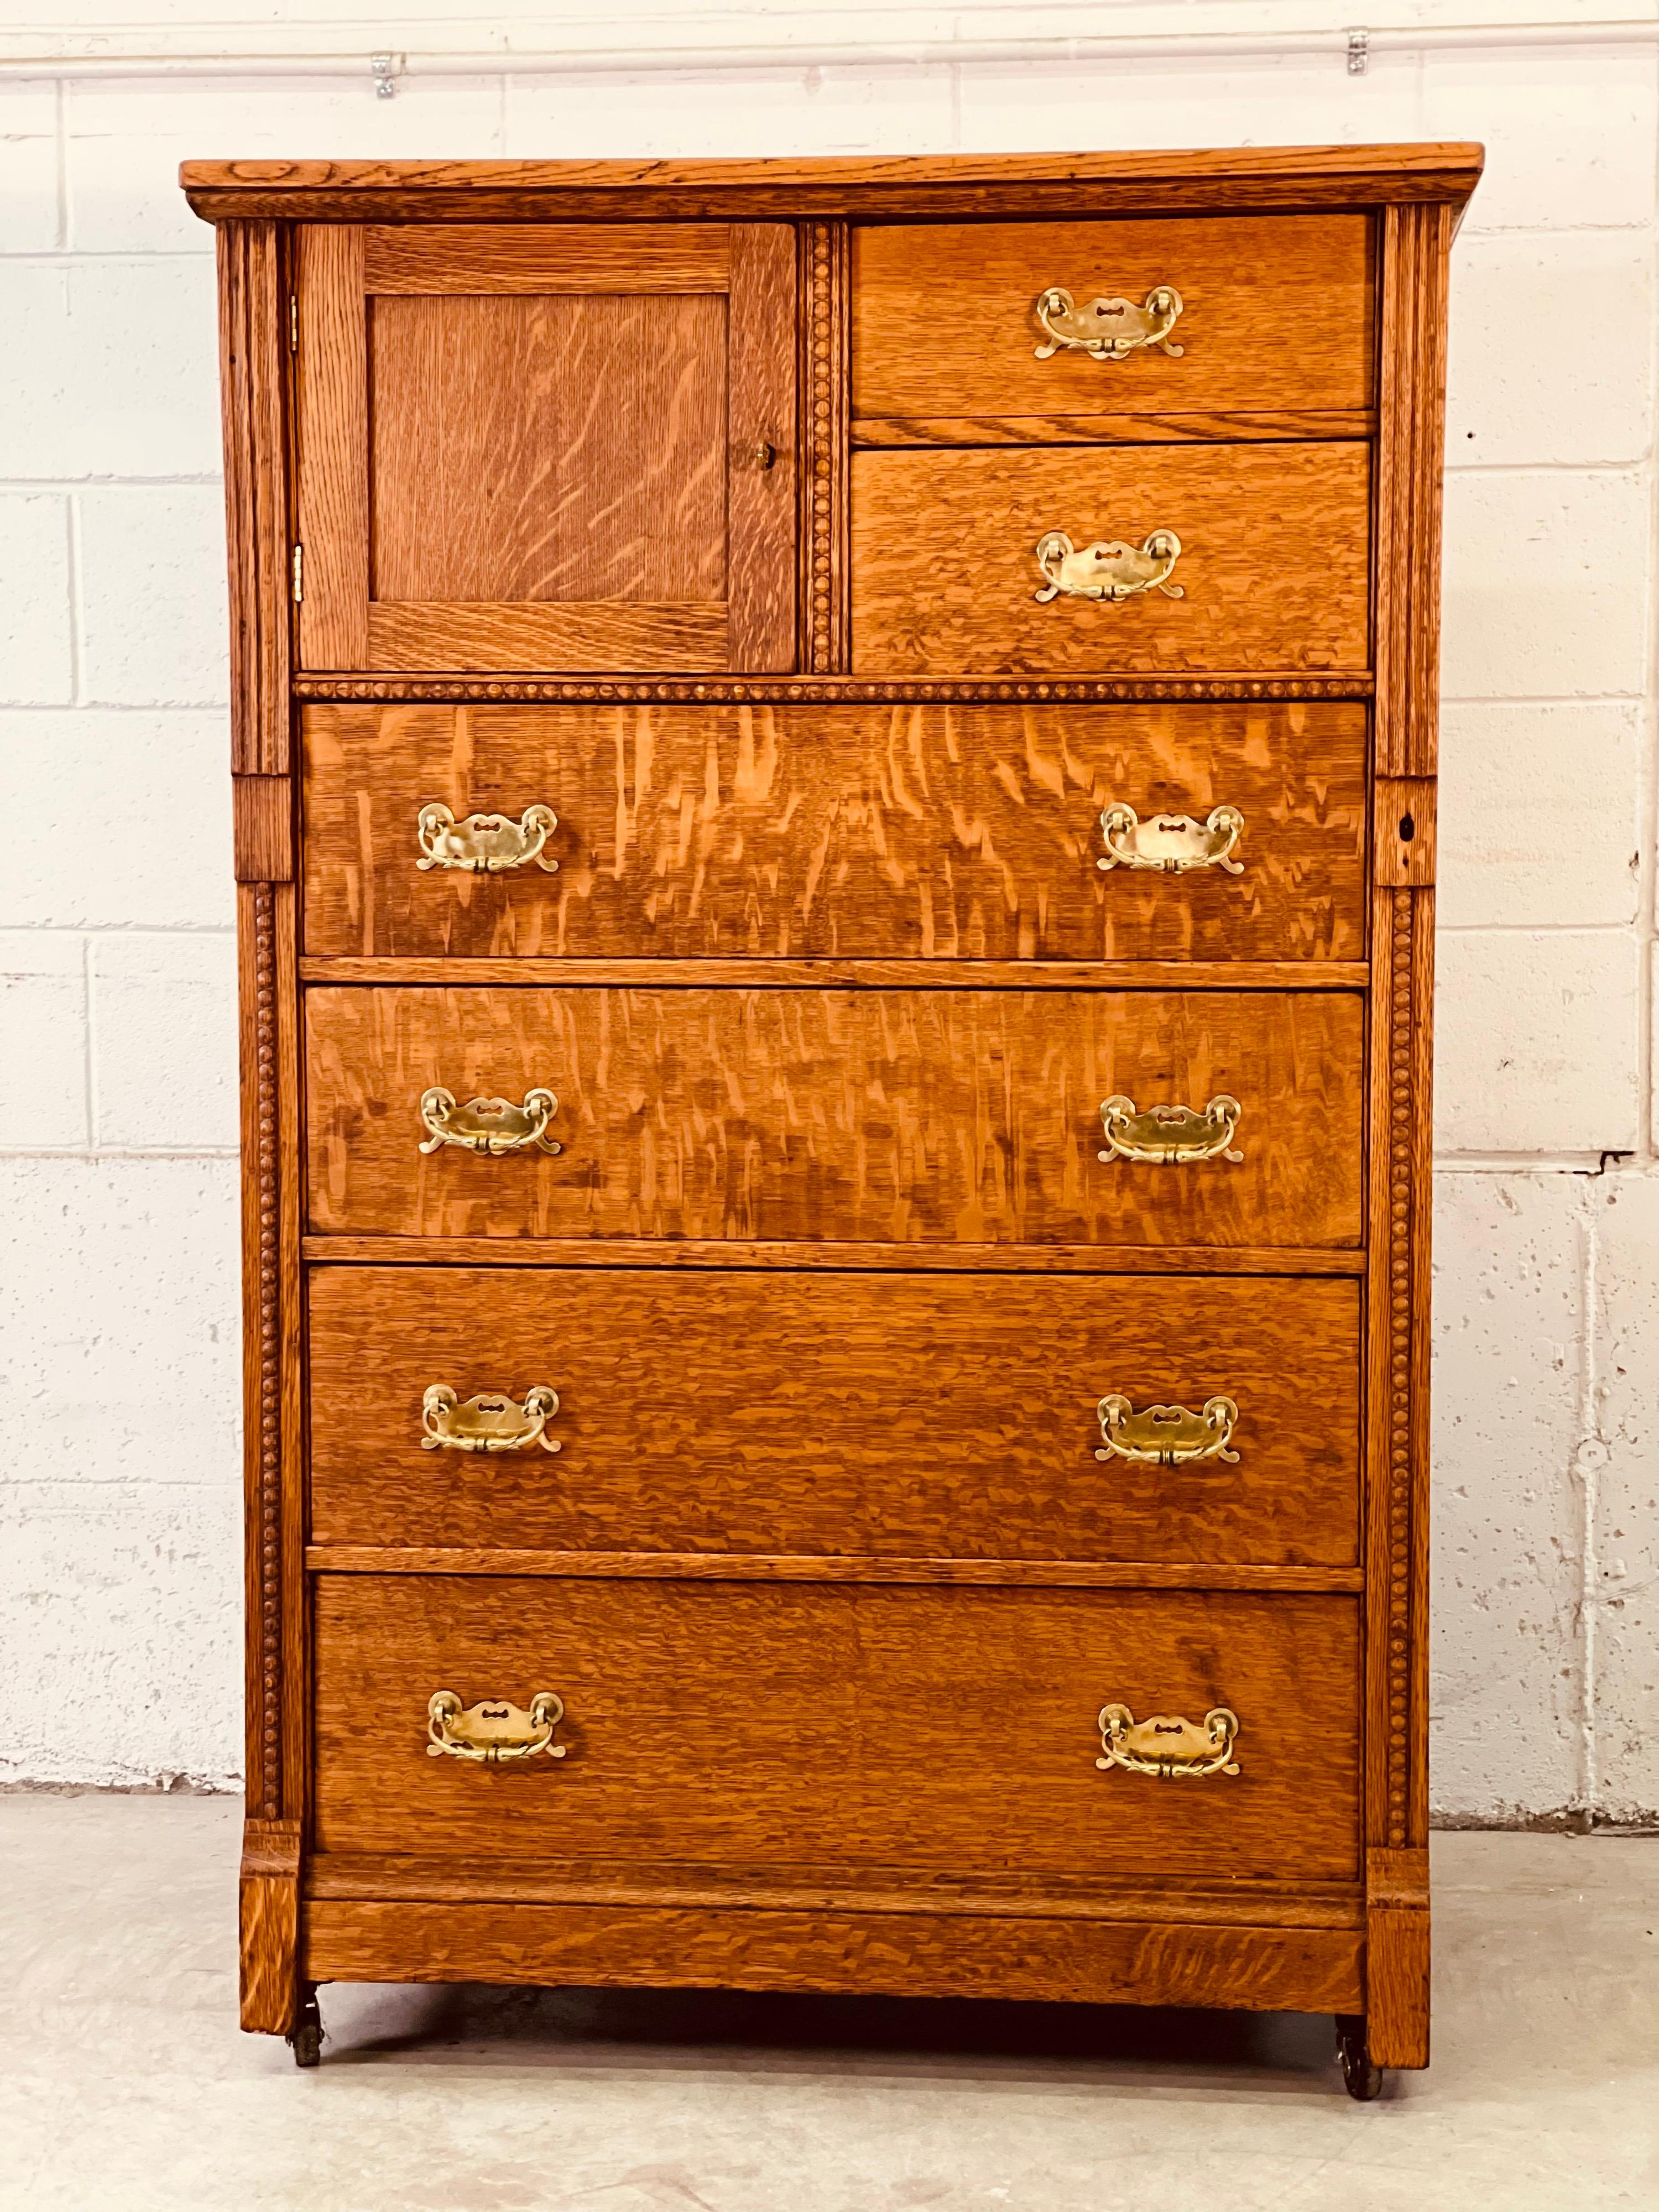 Antique quarter sawn oak wood tall dresser with brass pulls. The dresser has six drawers for storage and a square open area for additional storage. The dresser comes with a brass key that is for two locks. Neither lock is operational. The dresser is